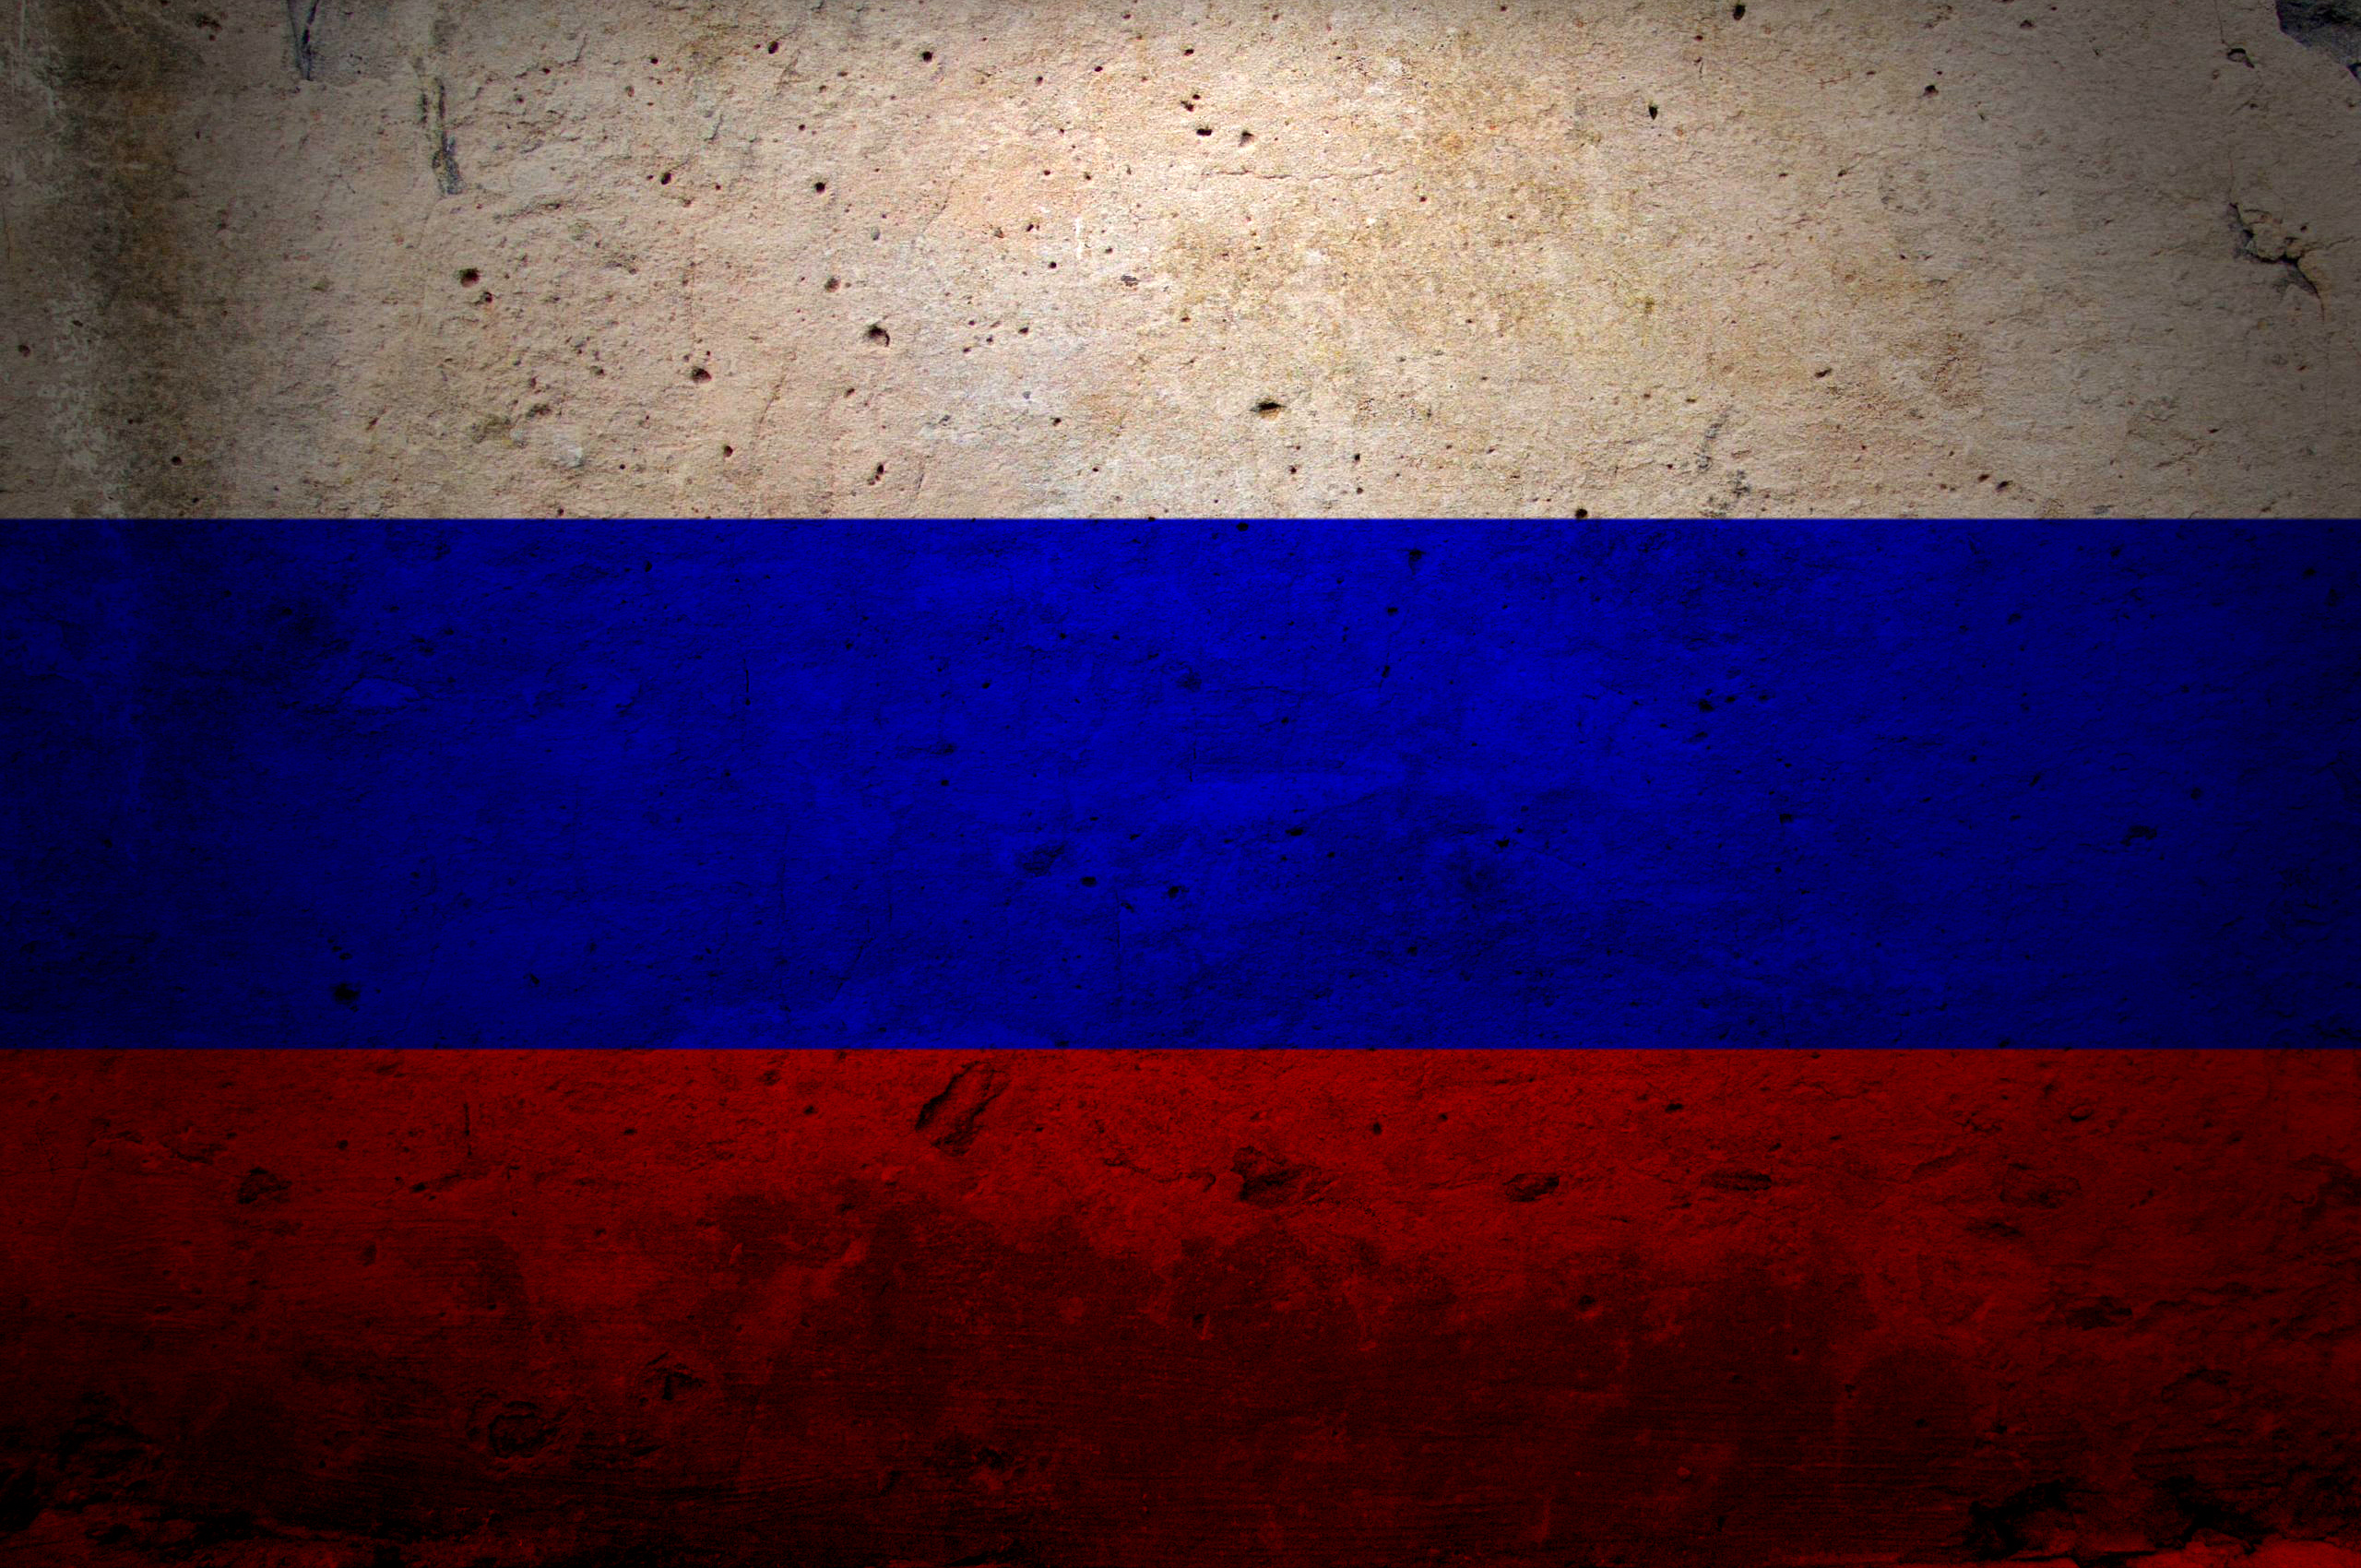 General 2560x1700 flag Russia grunge simple background minimalism white blue red